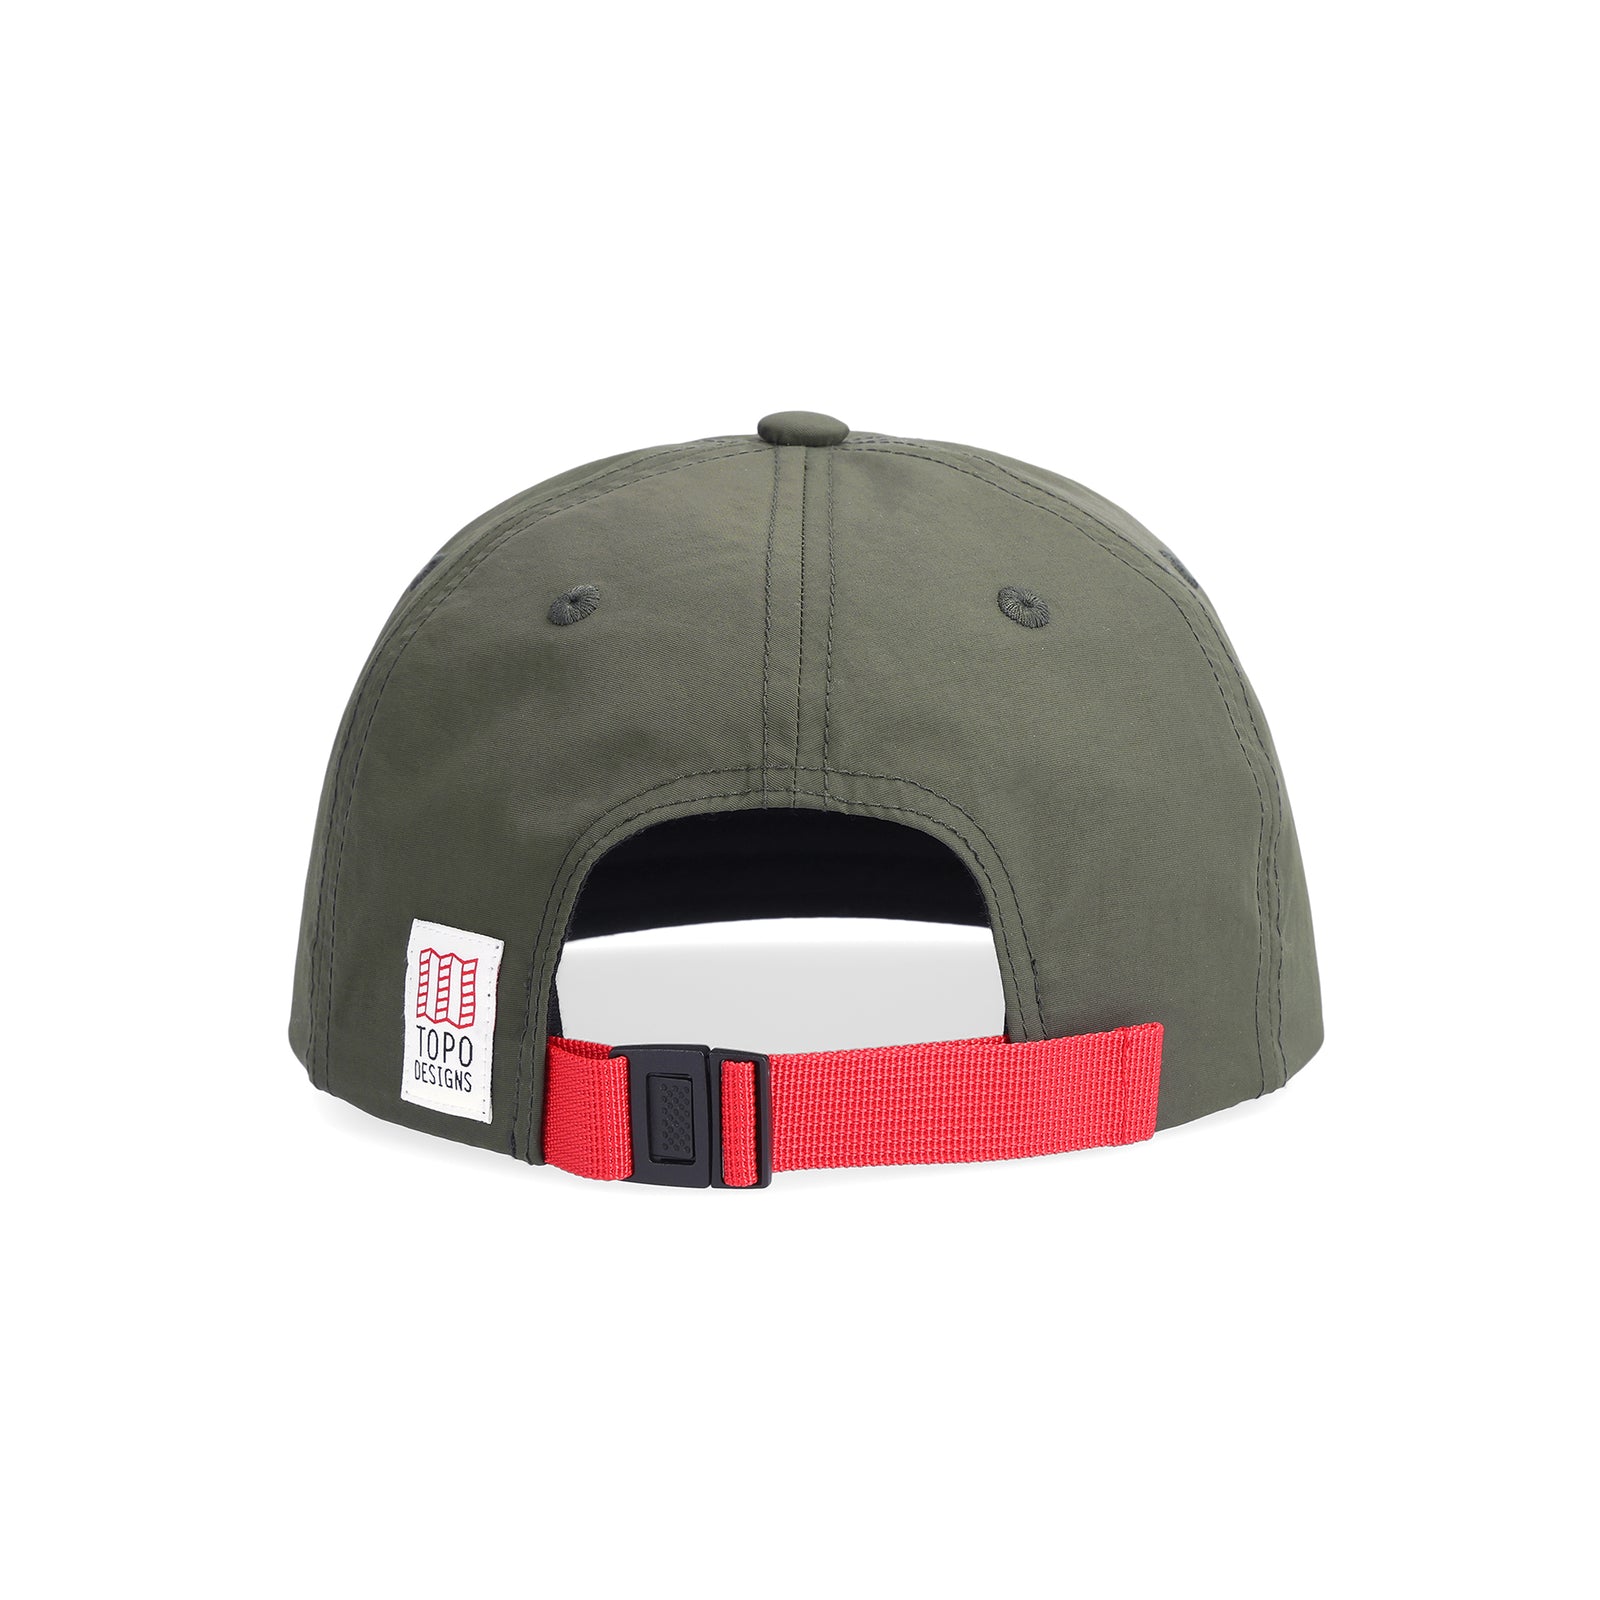 Back view of Topo Designs Nylon Ball Cap Stacked Map embroidered logo hat in "forest" green